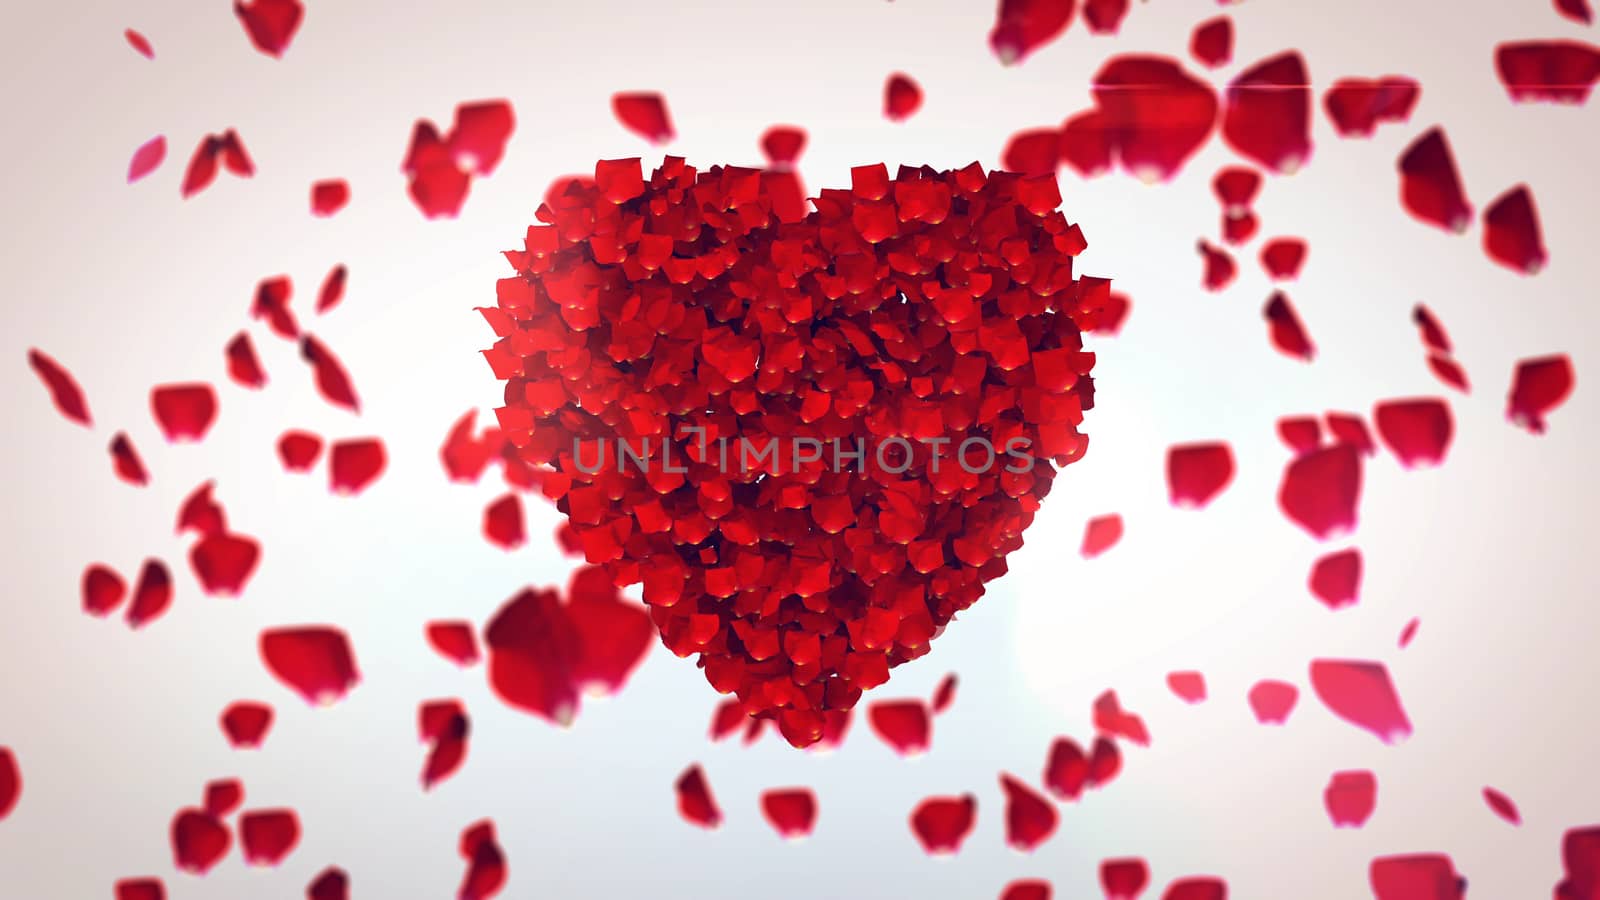 A hearty 3d illustration of flying petals of red roses in the white background. They make one big red heart and symbolize deep romantic feelings and some wedding approaching. 